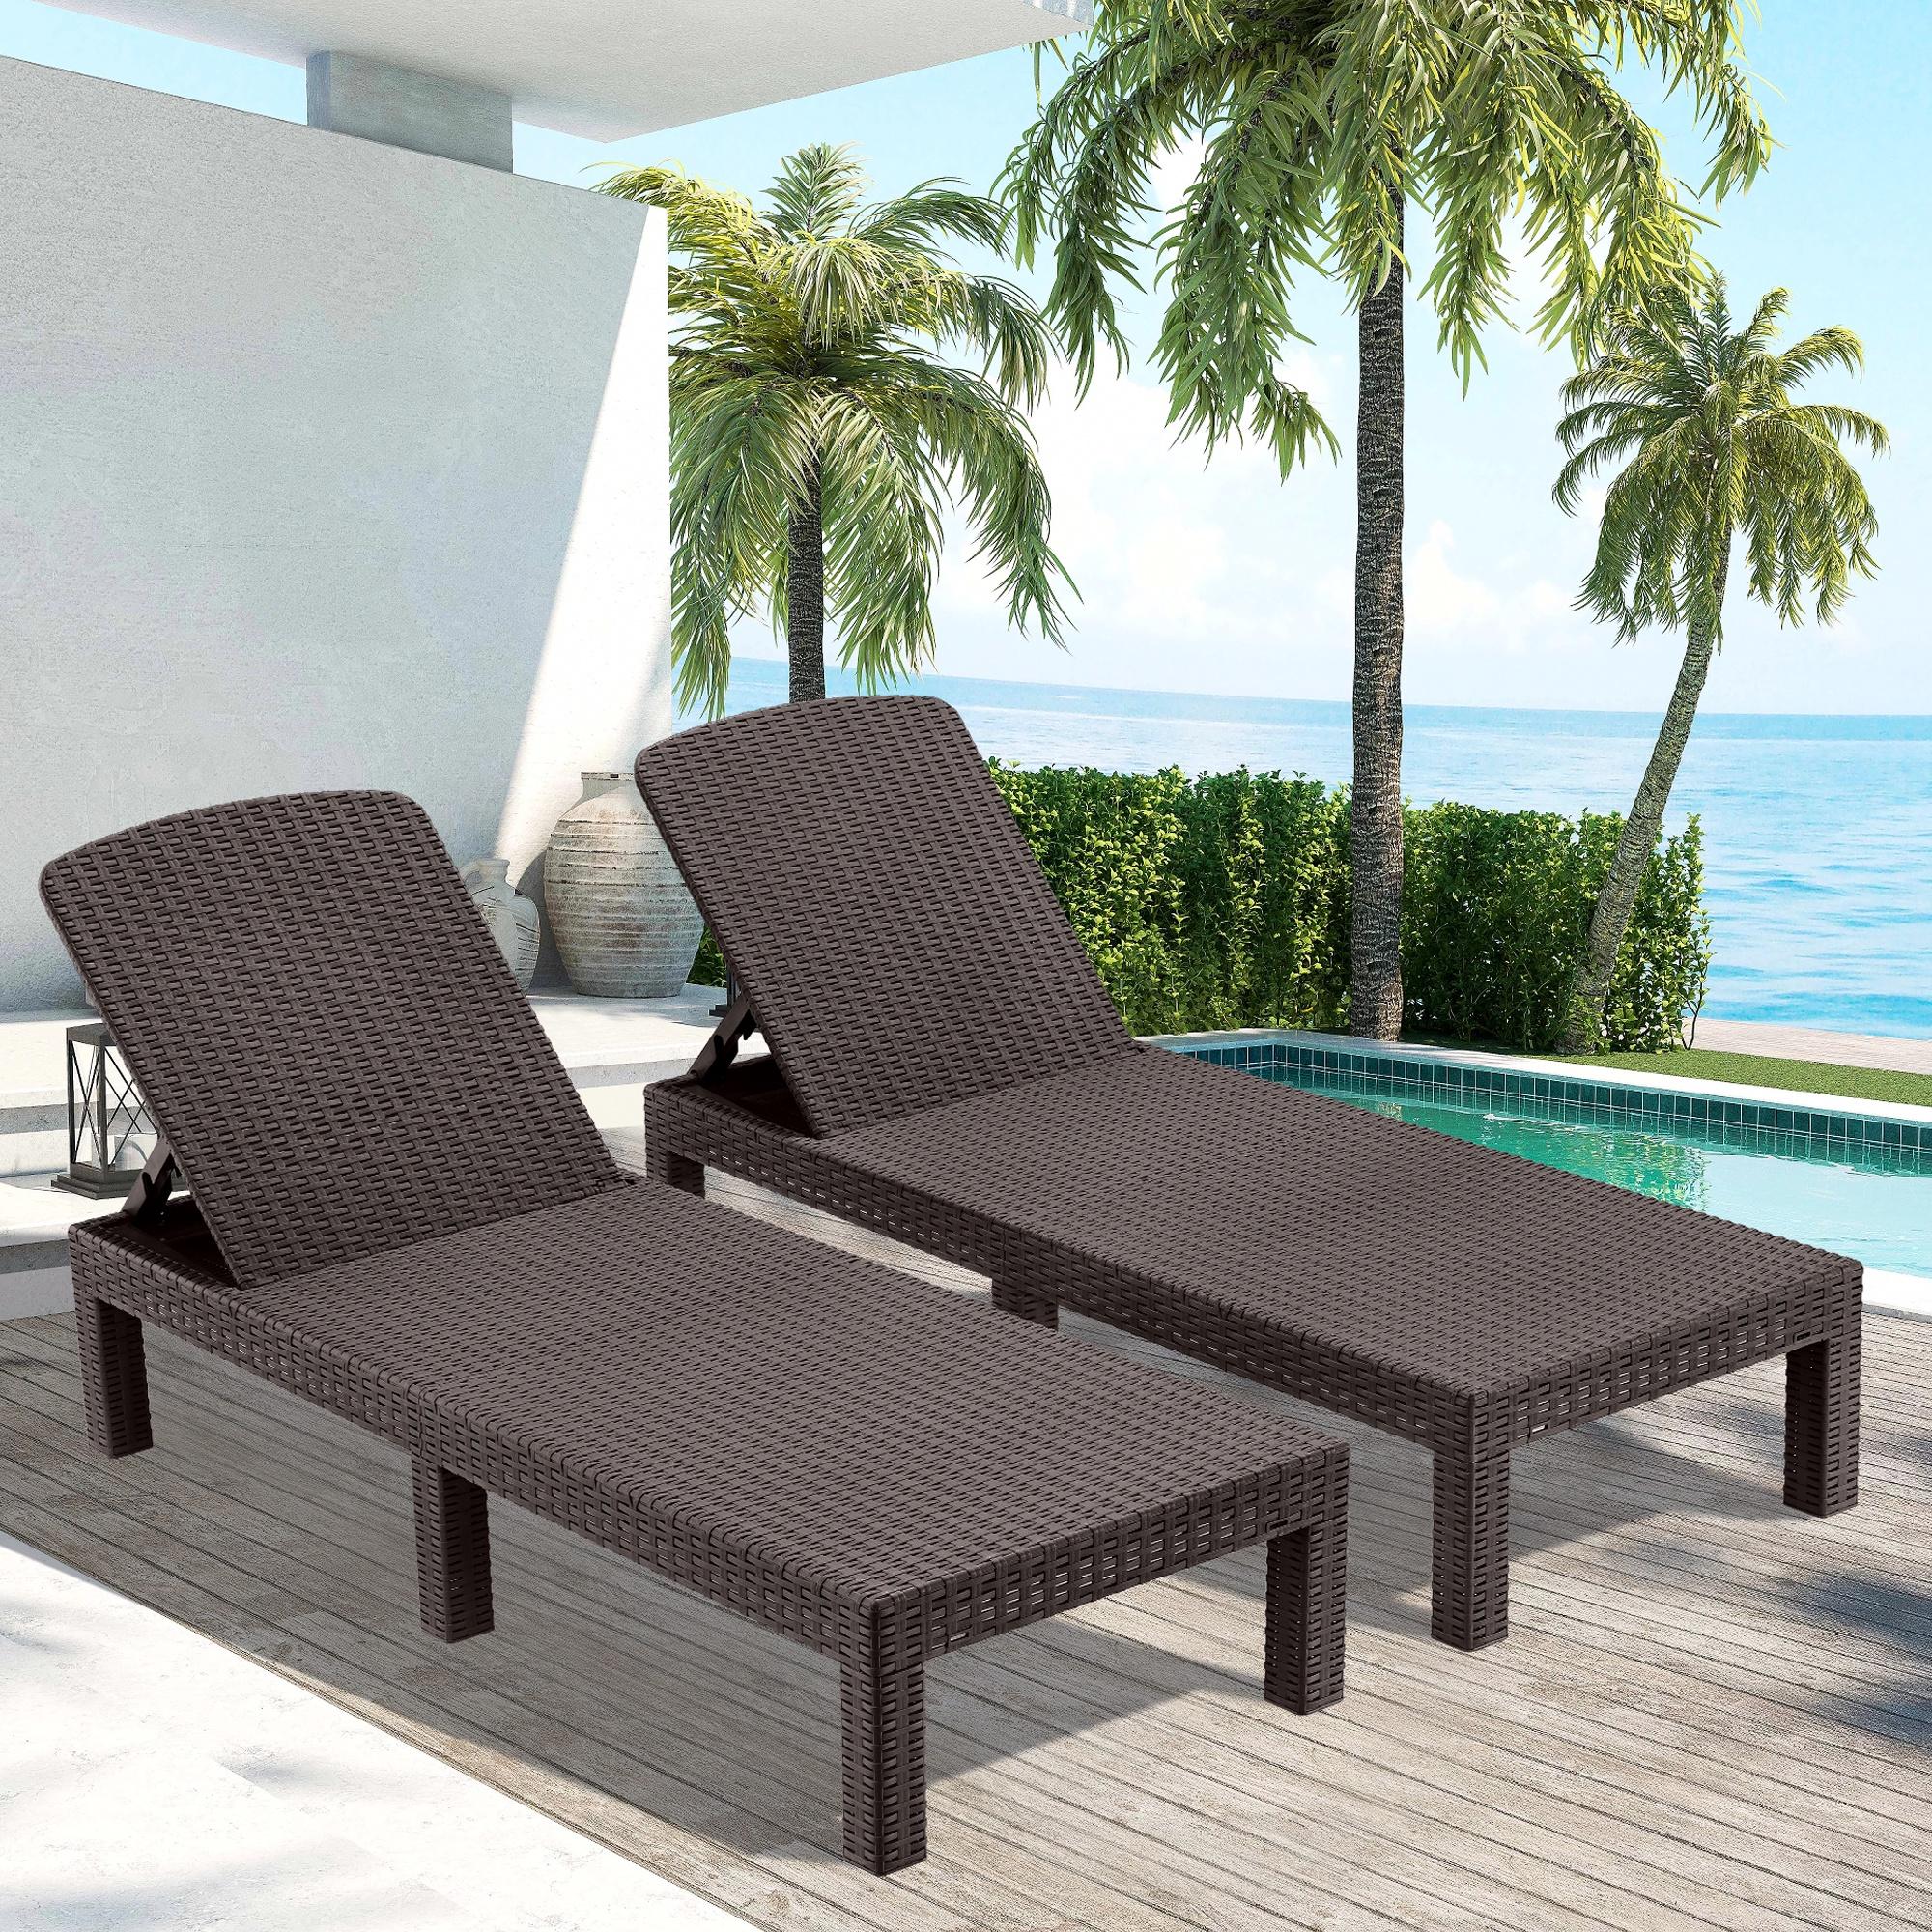 Syngar 2 Piece Chaise Lounge Set for Outside, Outdoor Adjustable Lounge Chairs Set of 2, Patio All-Weather PP Resin Reclining Chaise for Poolside Backyard Garden Porch, Espresso - image 2 of 10